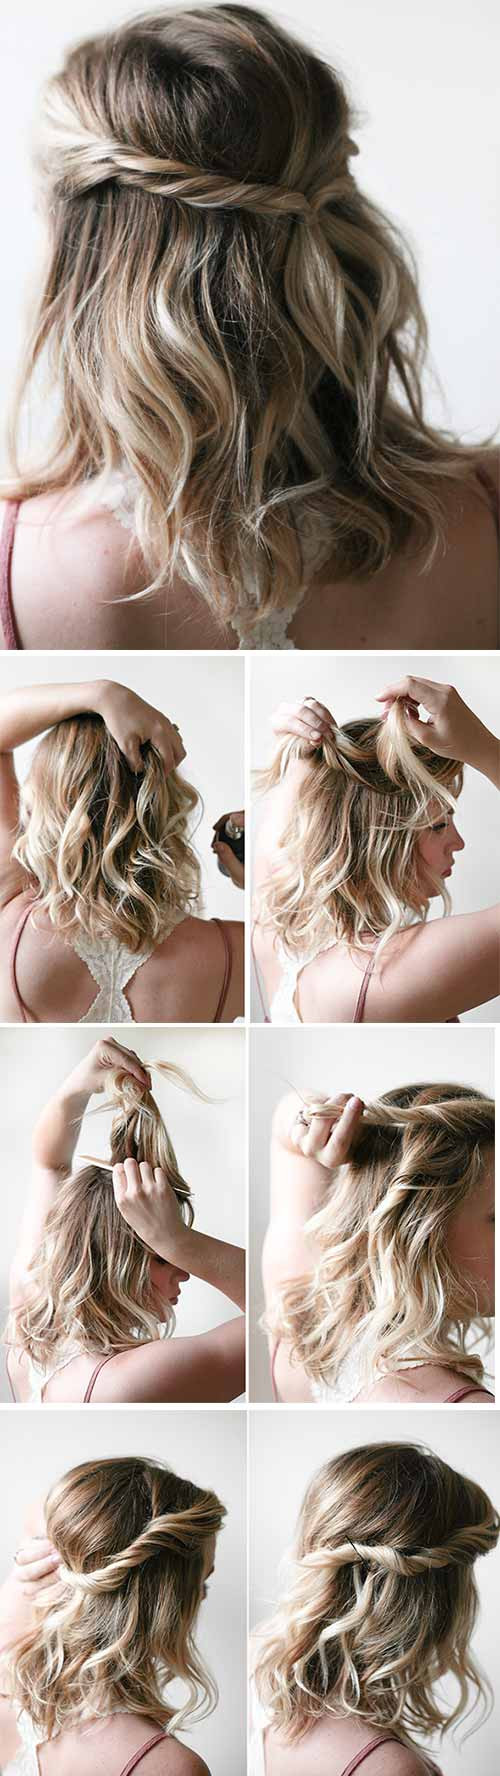 Easy Hairstyles For Short Hair Step By Step
 20 Incredible DIY Short Hairstyles A Step By Step Guide